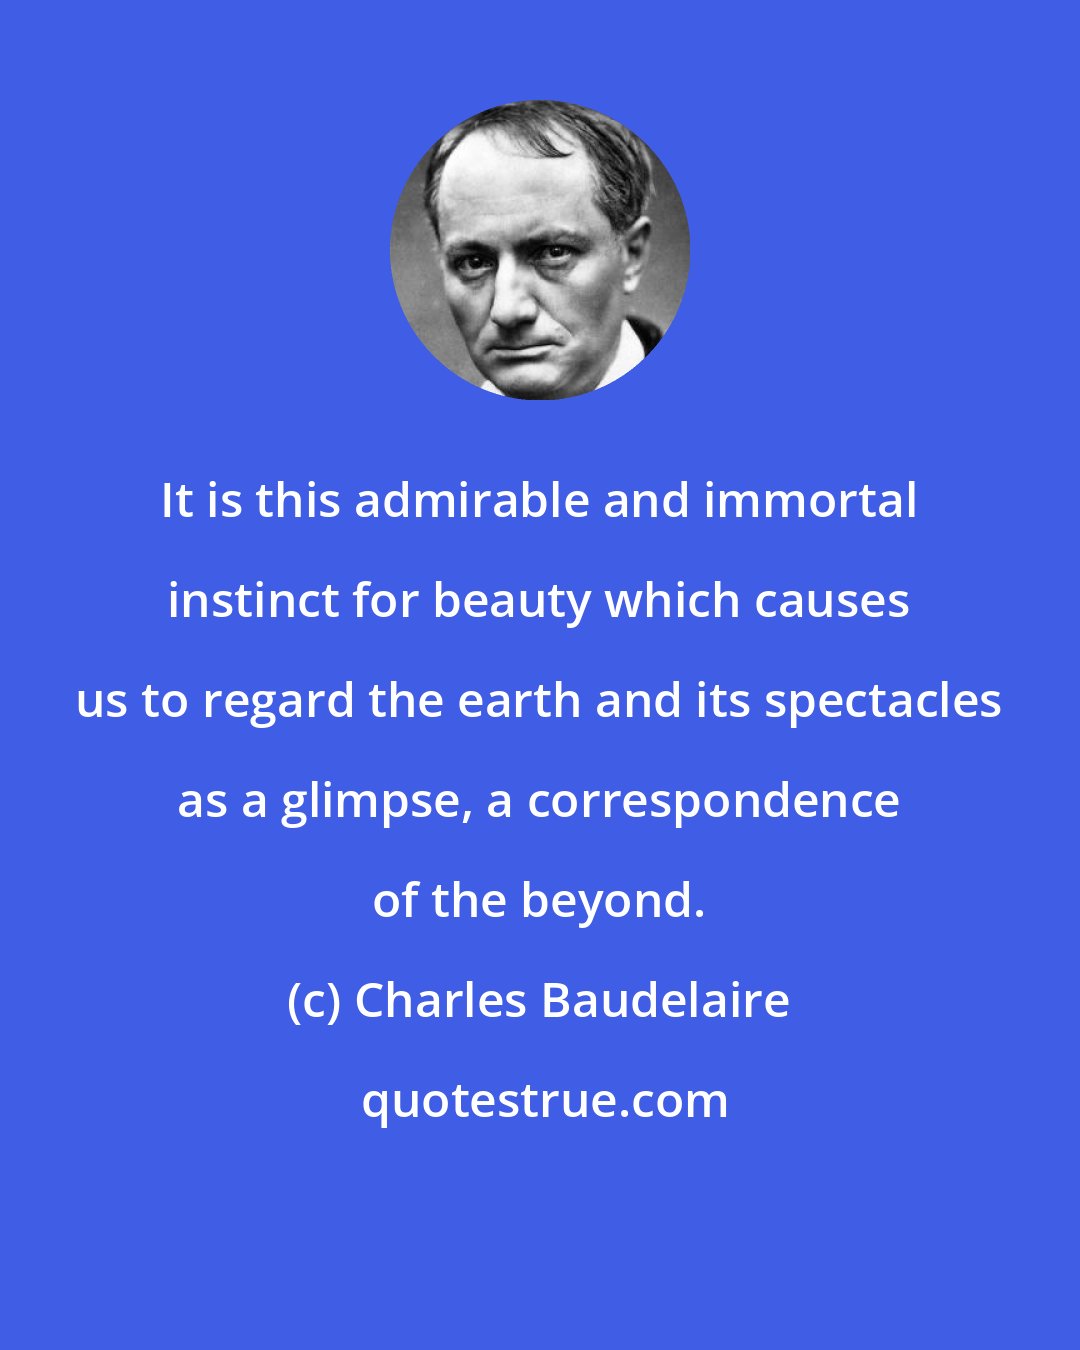 Charles Baudelaire: It is this admirable and immortal instinct for beauty which causes us to regard the earth and its spectacles as a glimpse, a correspondence of the beyond.